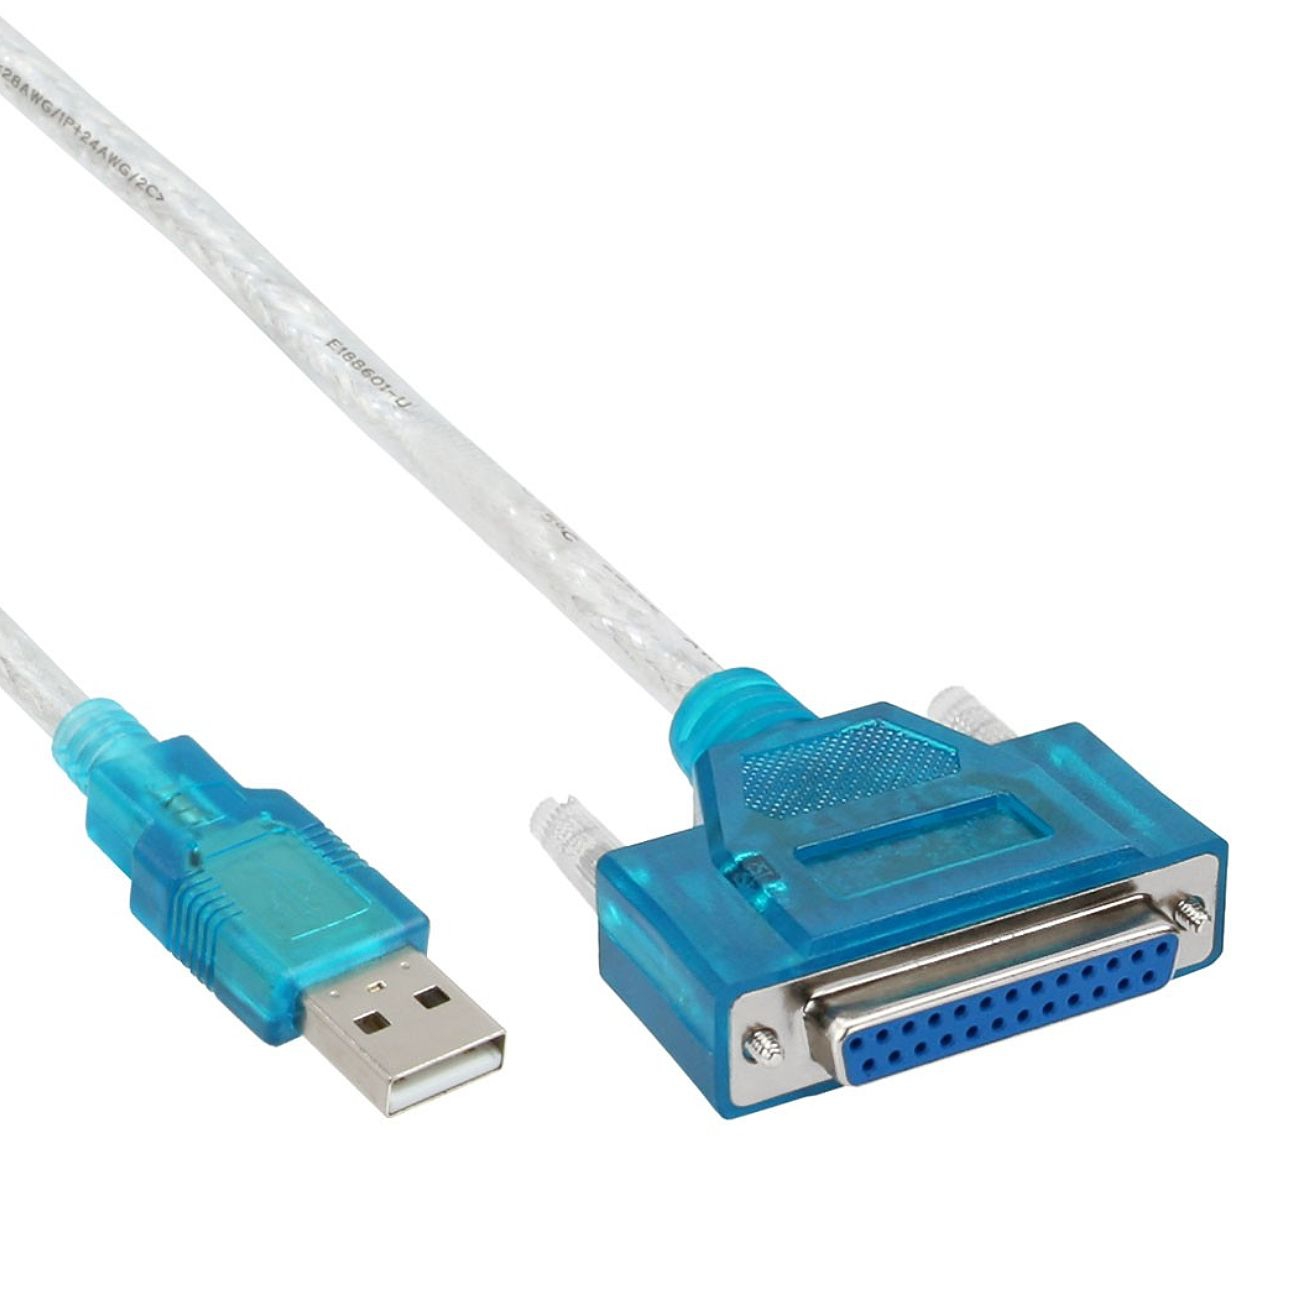 USB parallel adapter DB25 female for HP printers